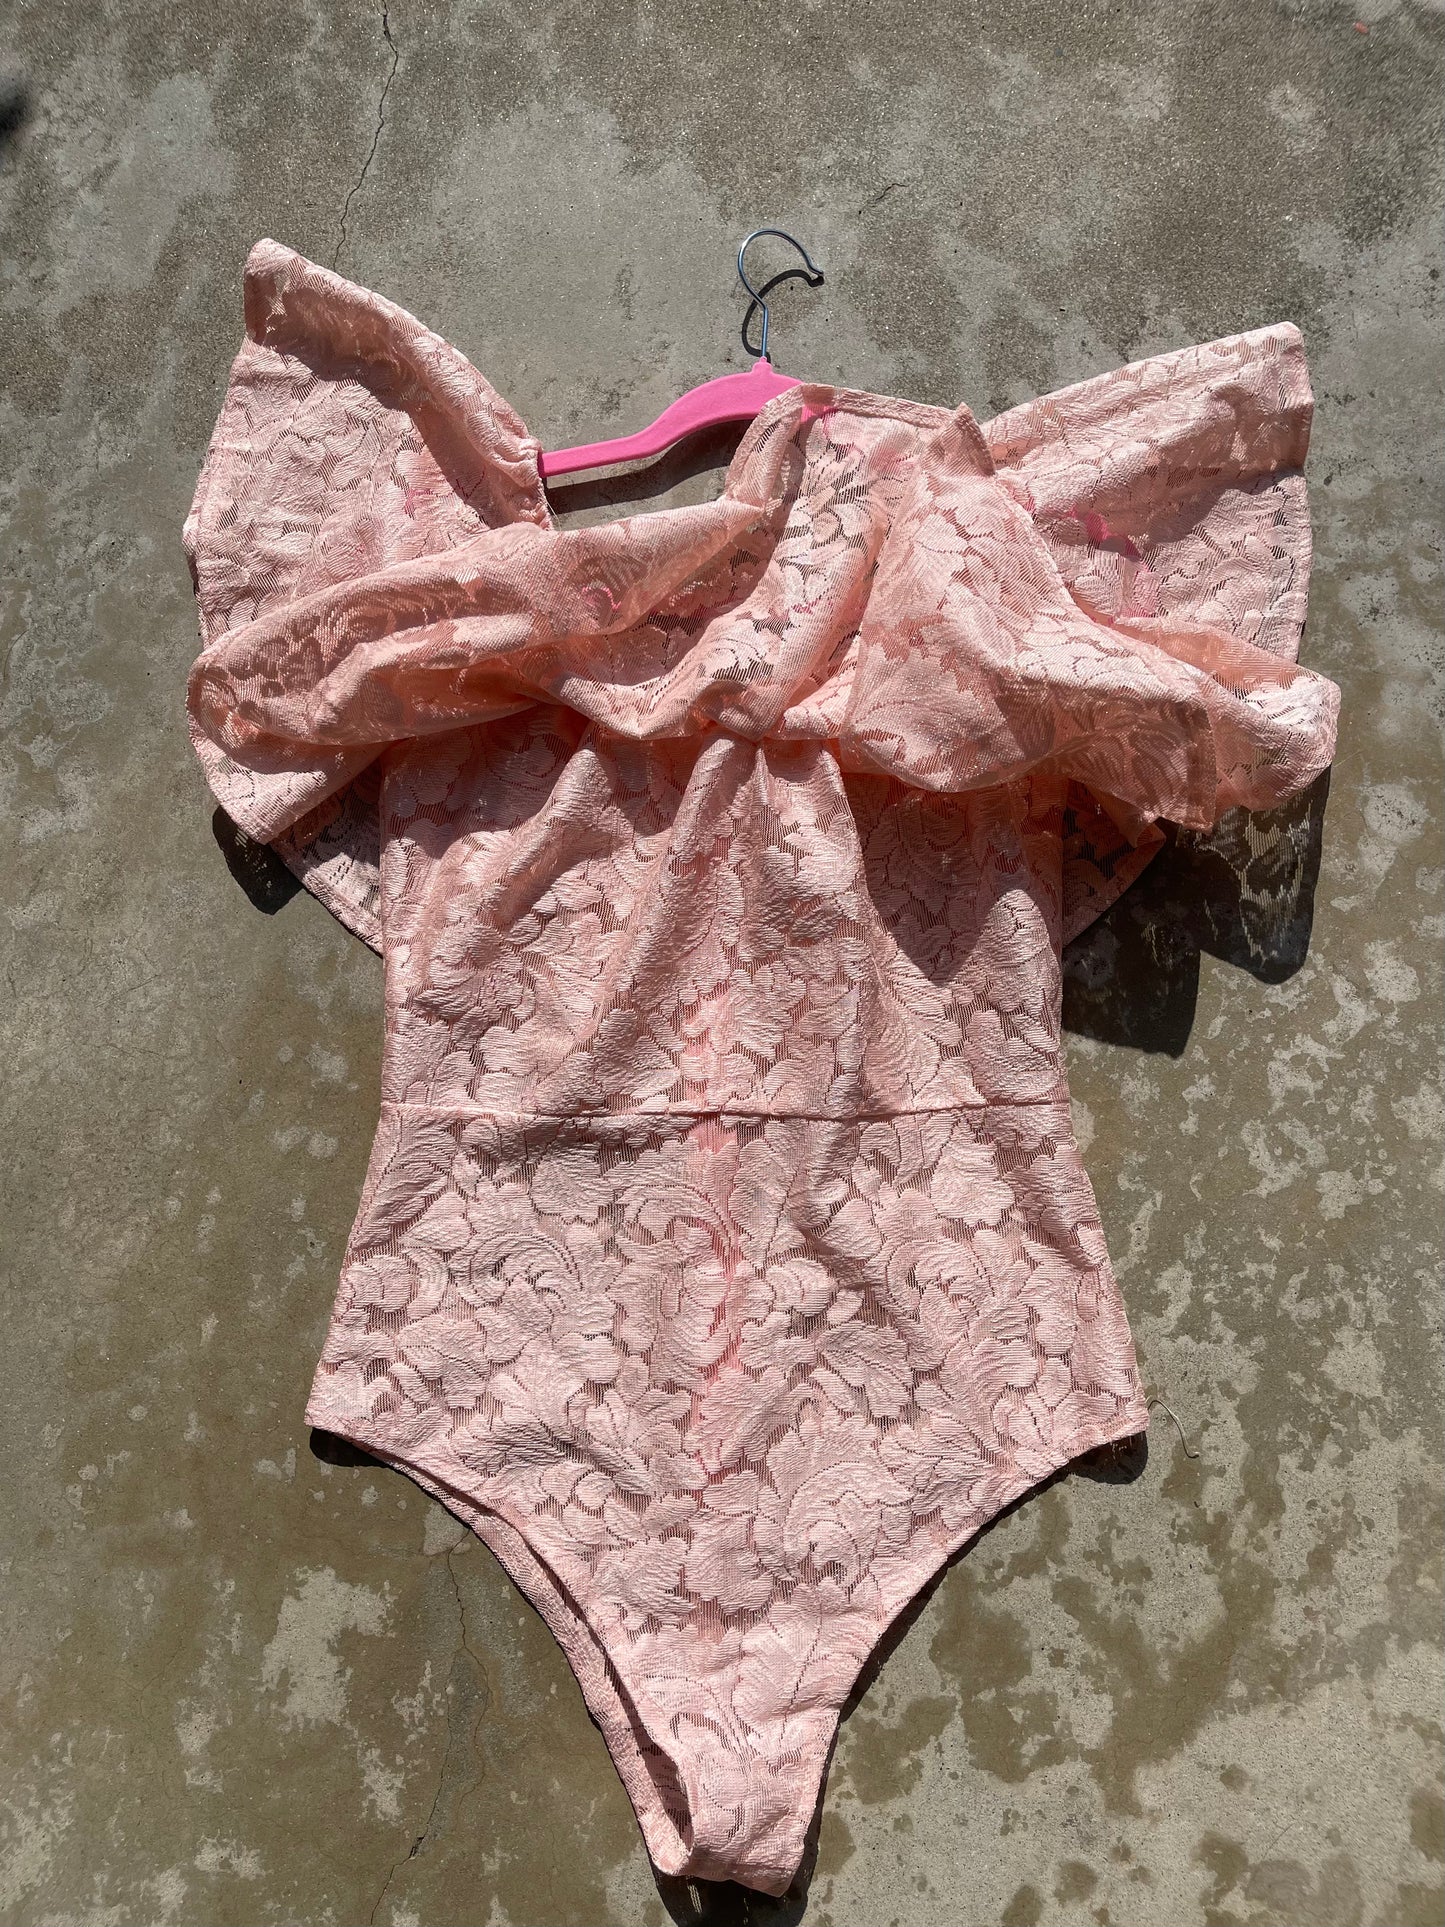 Vintage 70s / 80s Lace Sheer Rose Pink Romantic Ruffle Overlay Bodysuit Fits S-M & Possible Size L